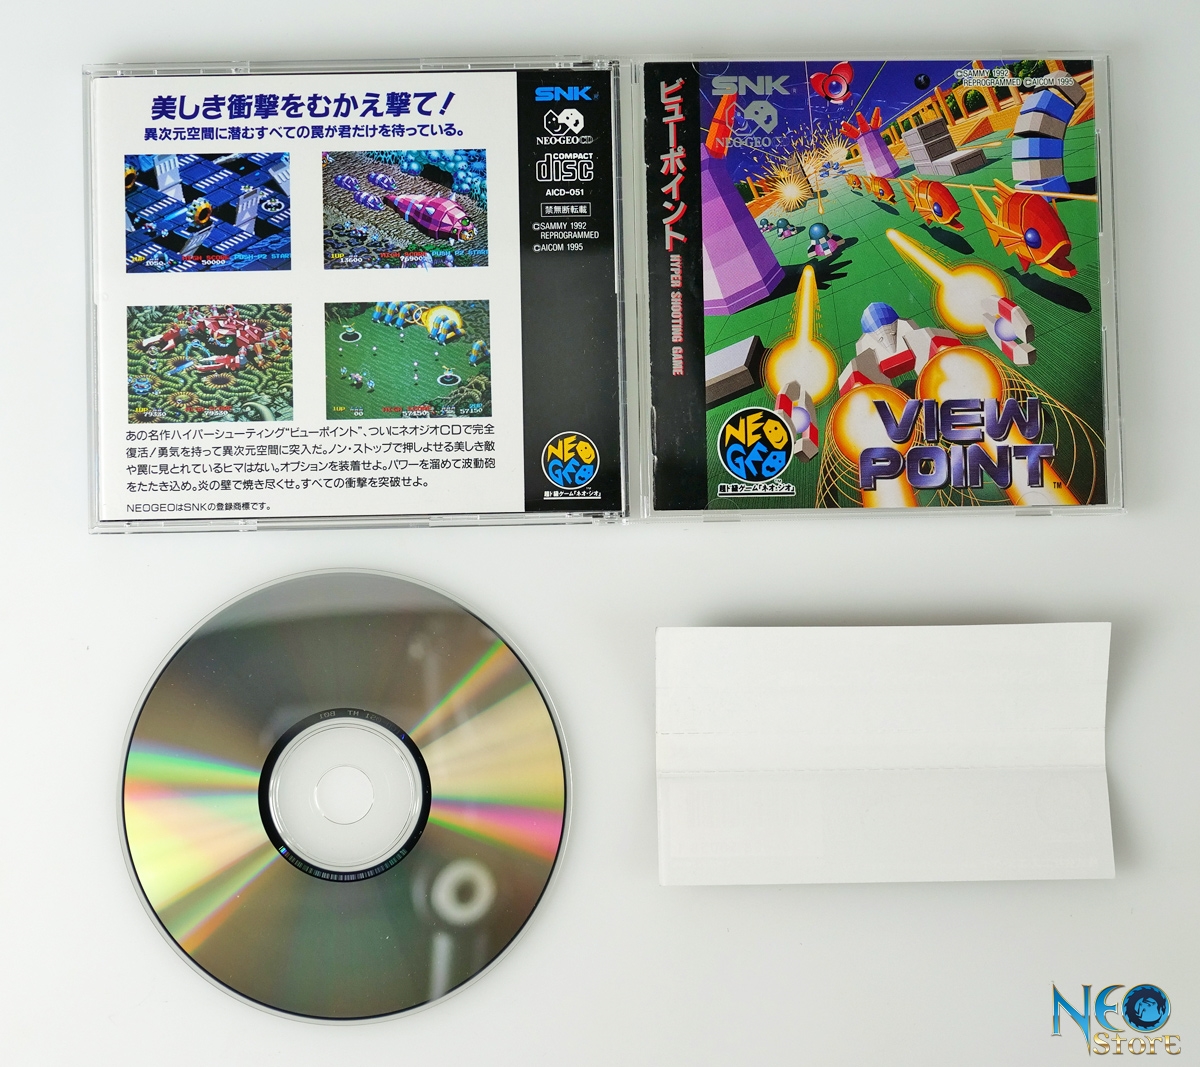 View Point Japanese Neo-Geo CD